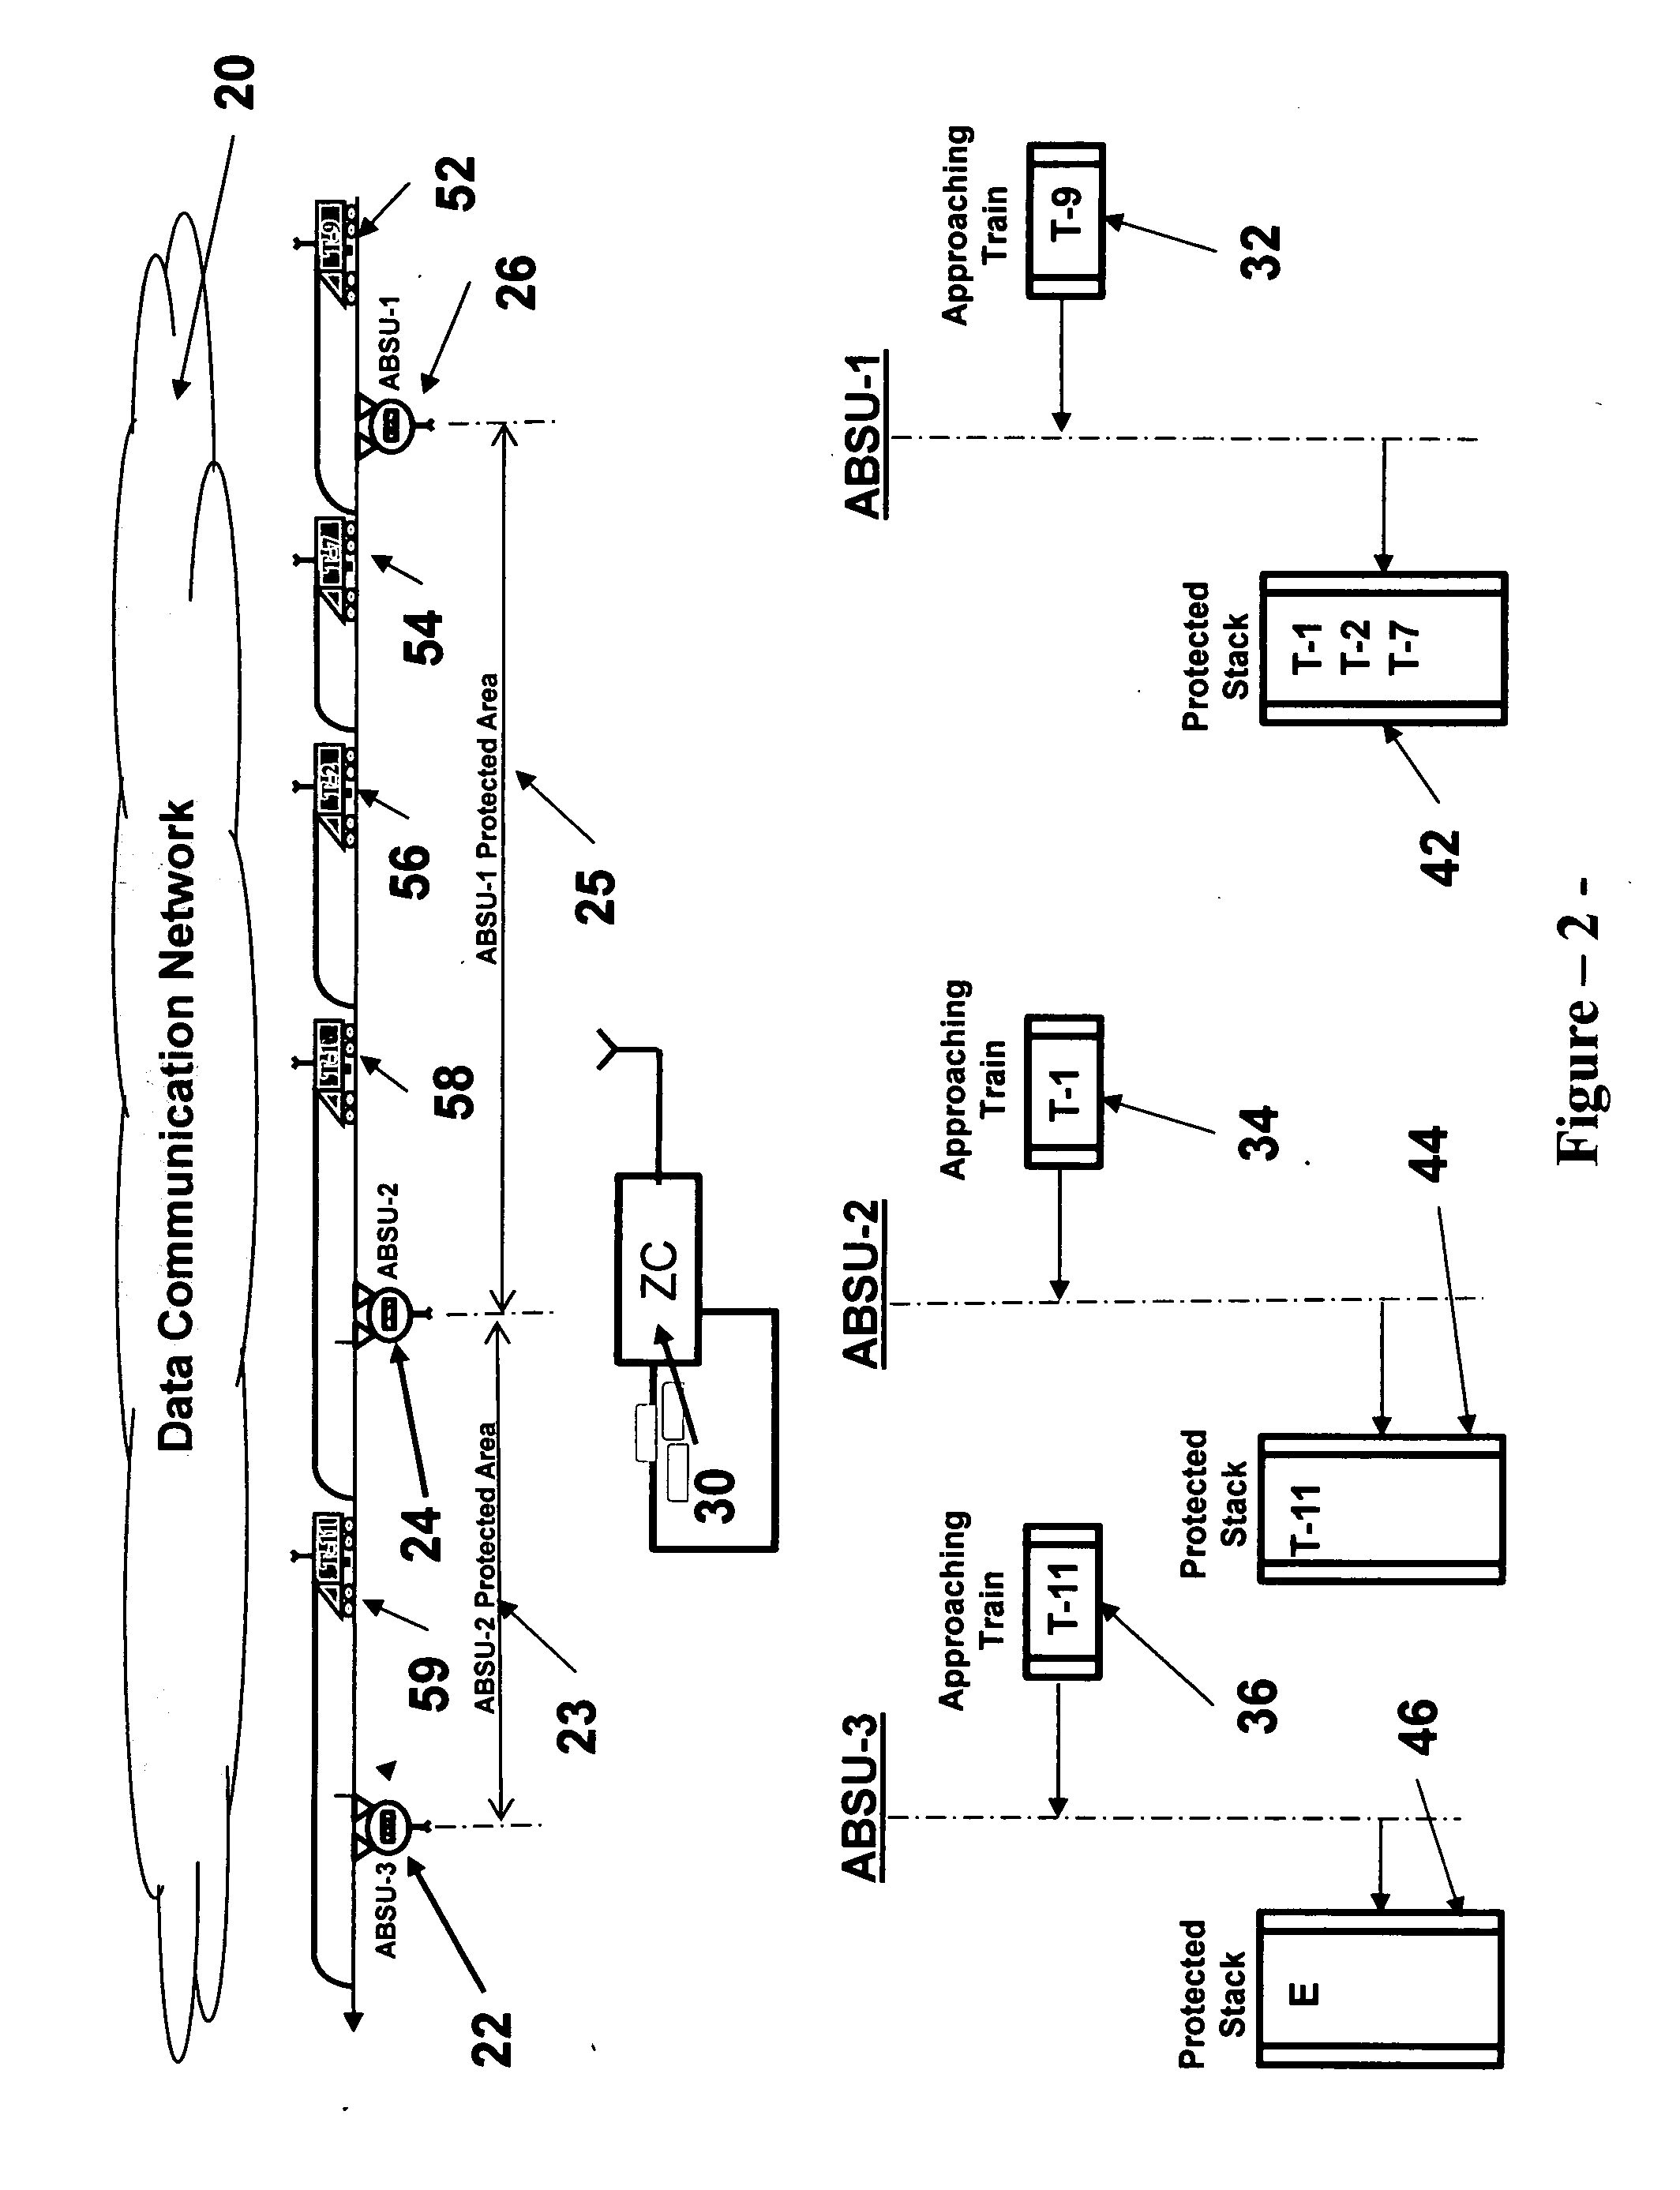 Method & apparatus for an auxiliary train control system